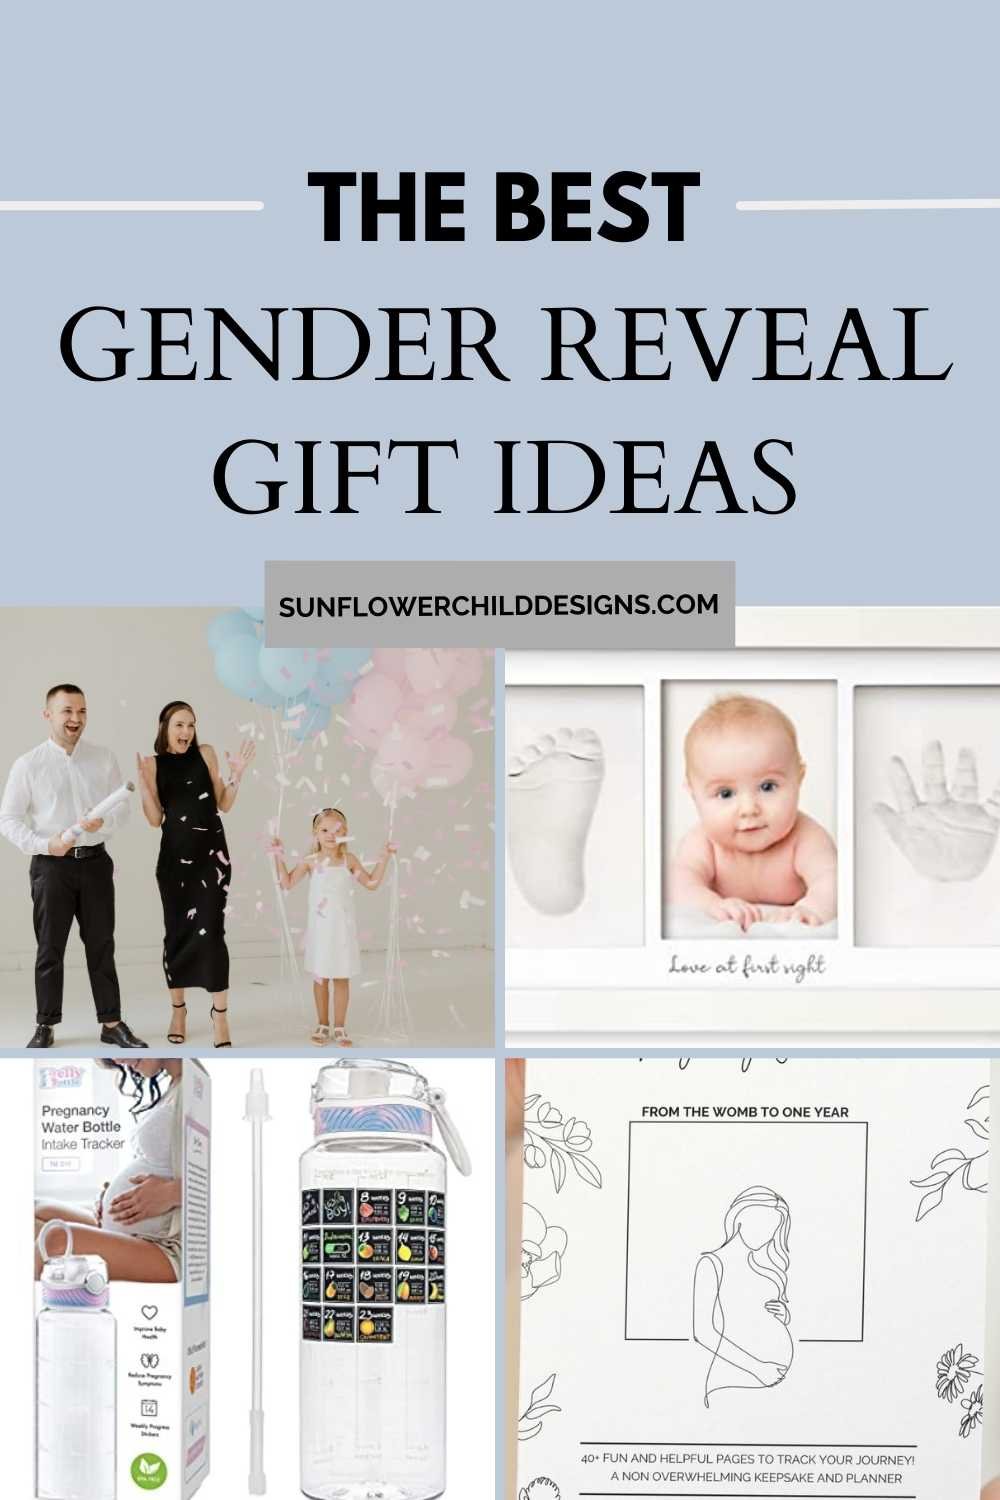 Unveiled: The Least Wanted Gender Reveal Gifts